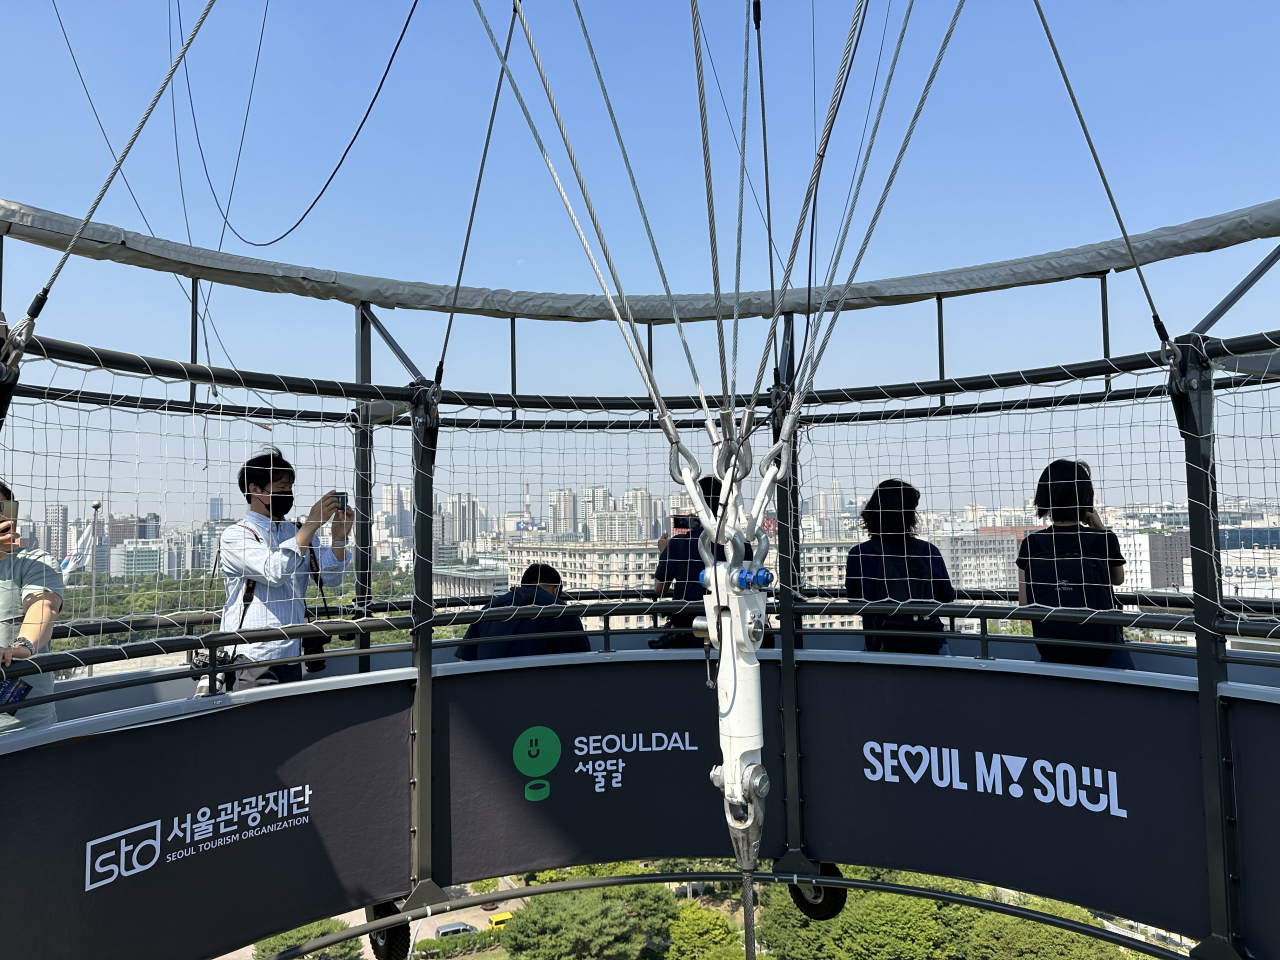 The press ride Seouldal, a tethered helium balloon ride soon to be operated by the Seoul Metropolitan Government near Yeouido, western Seoul, Friday. (Lee Jung-joo/The Korea Herald)